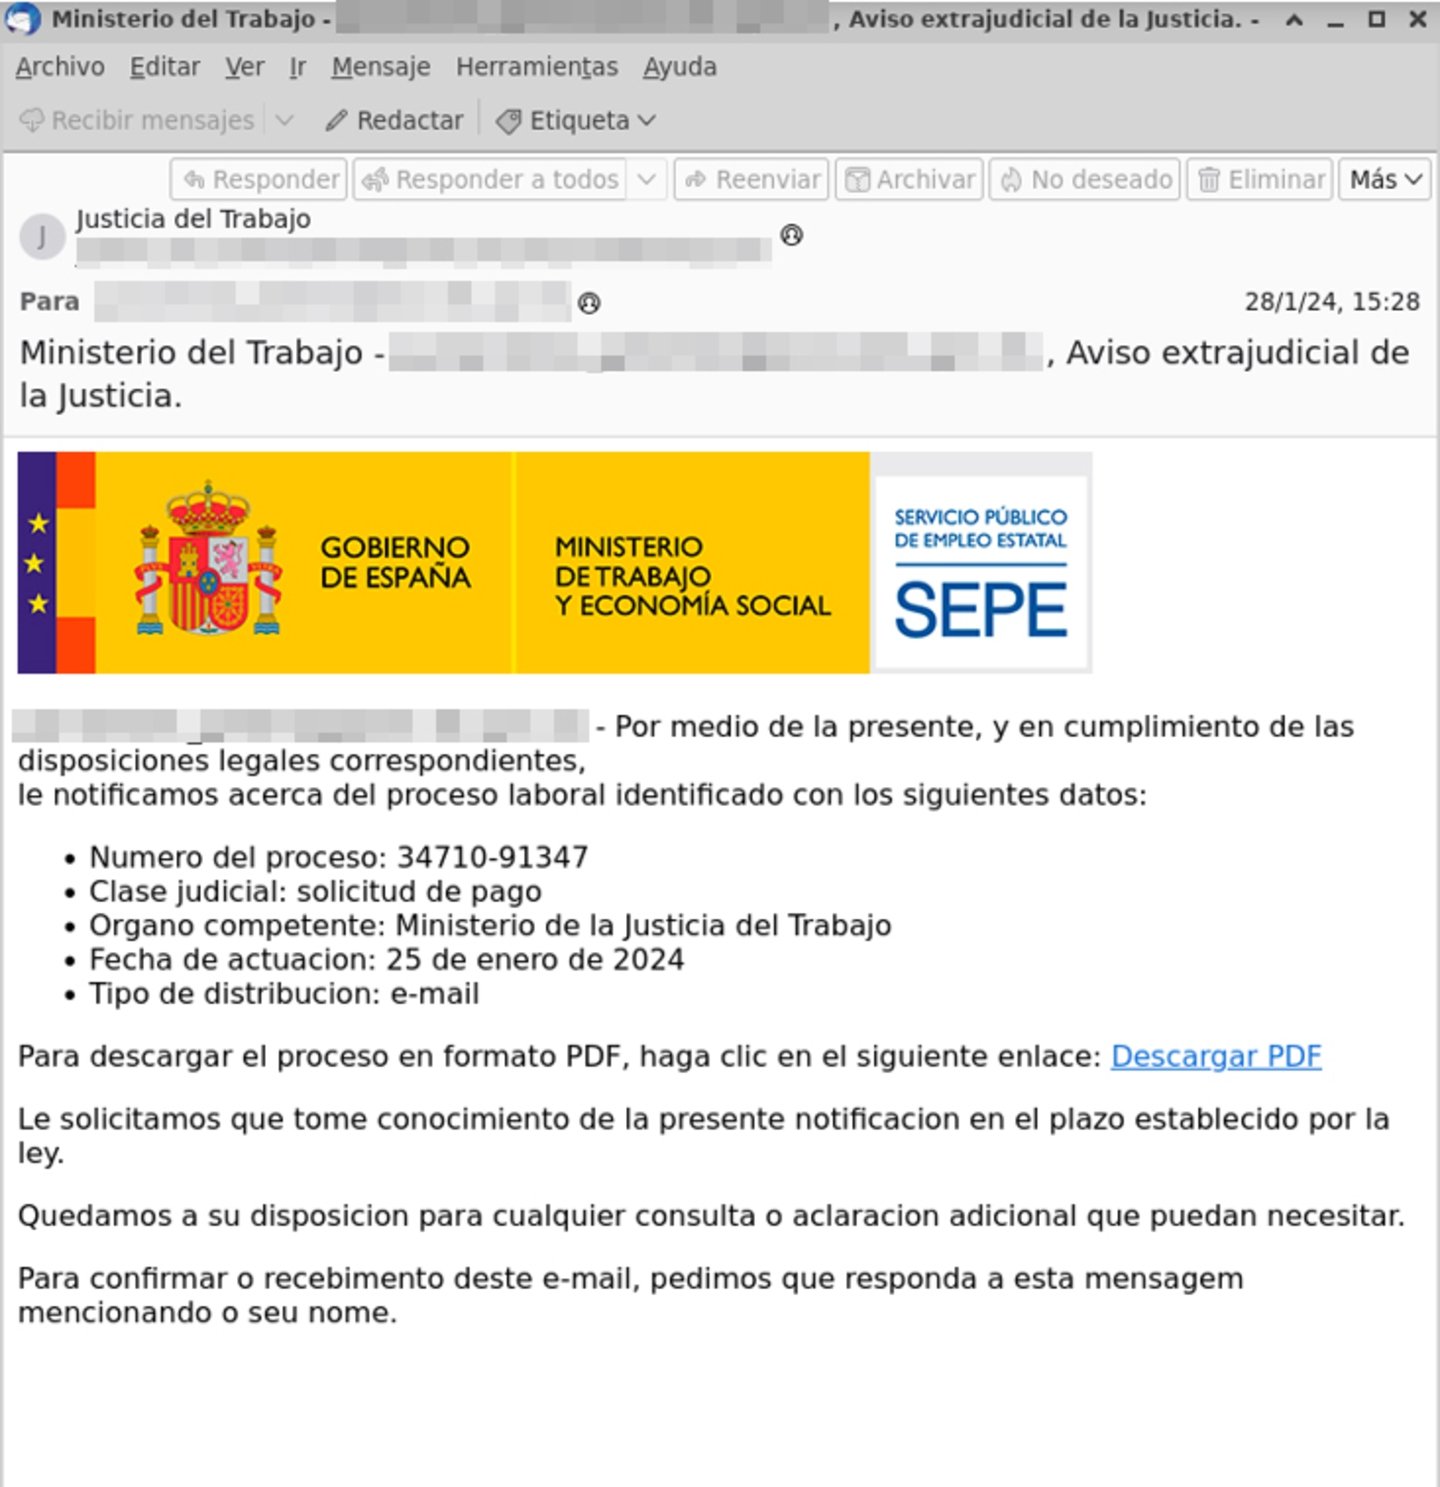 The new scam that impersonates the SEPE: be careful if you receive this email